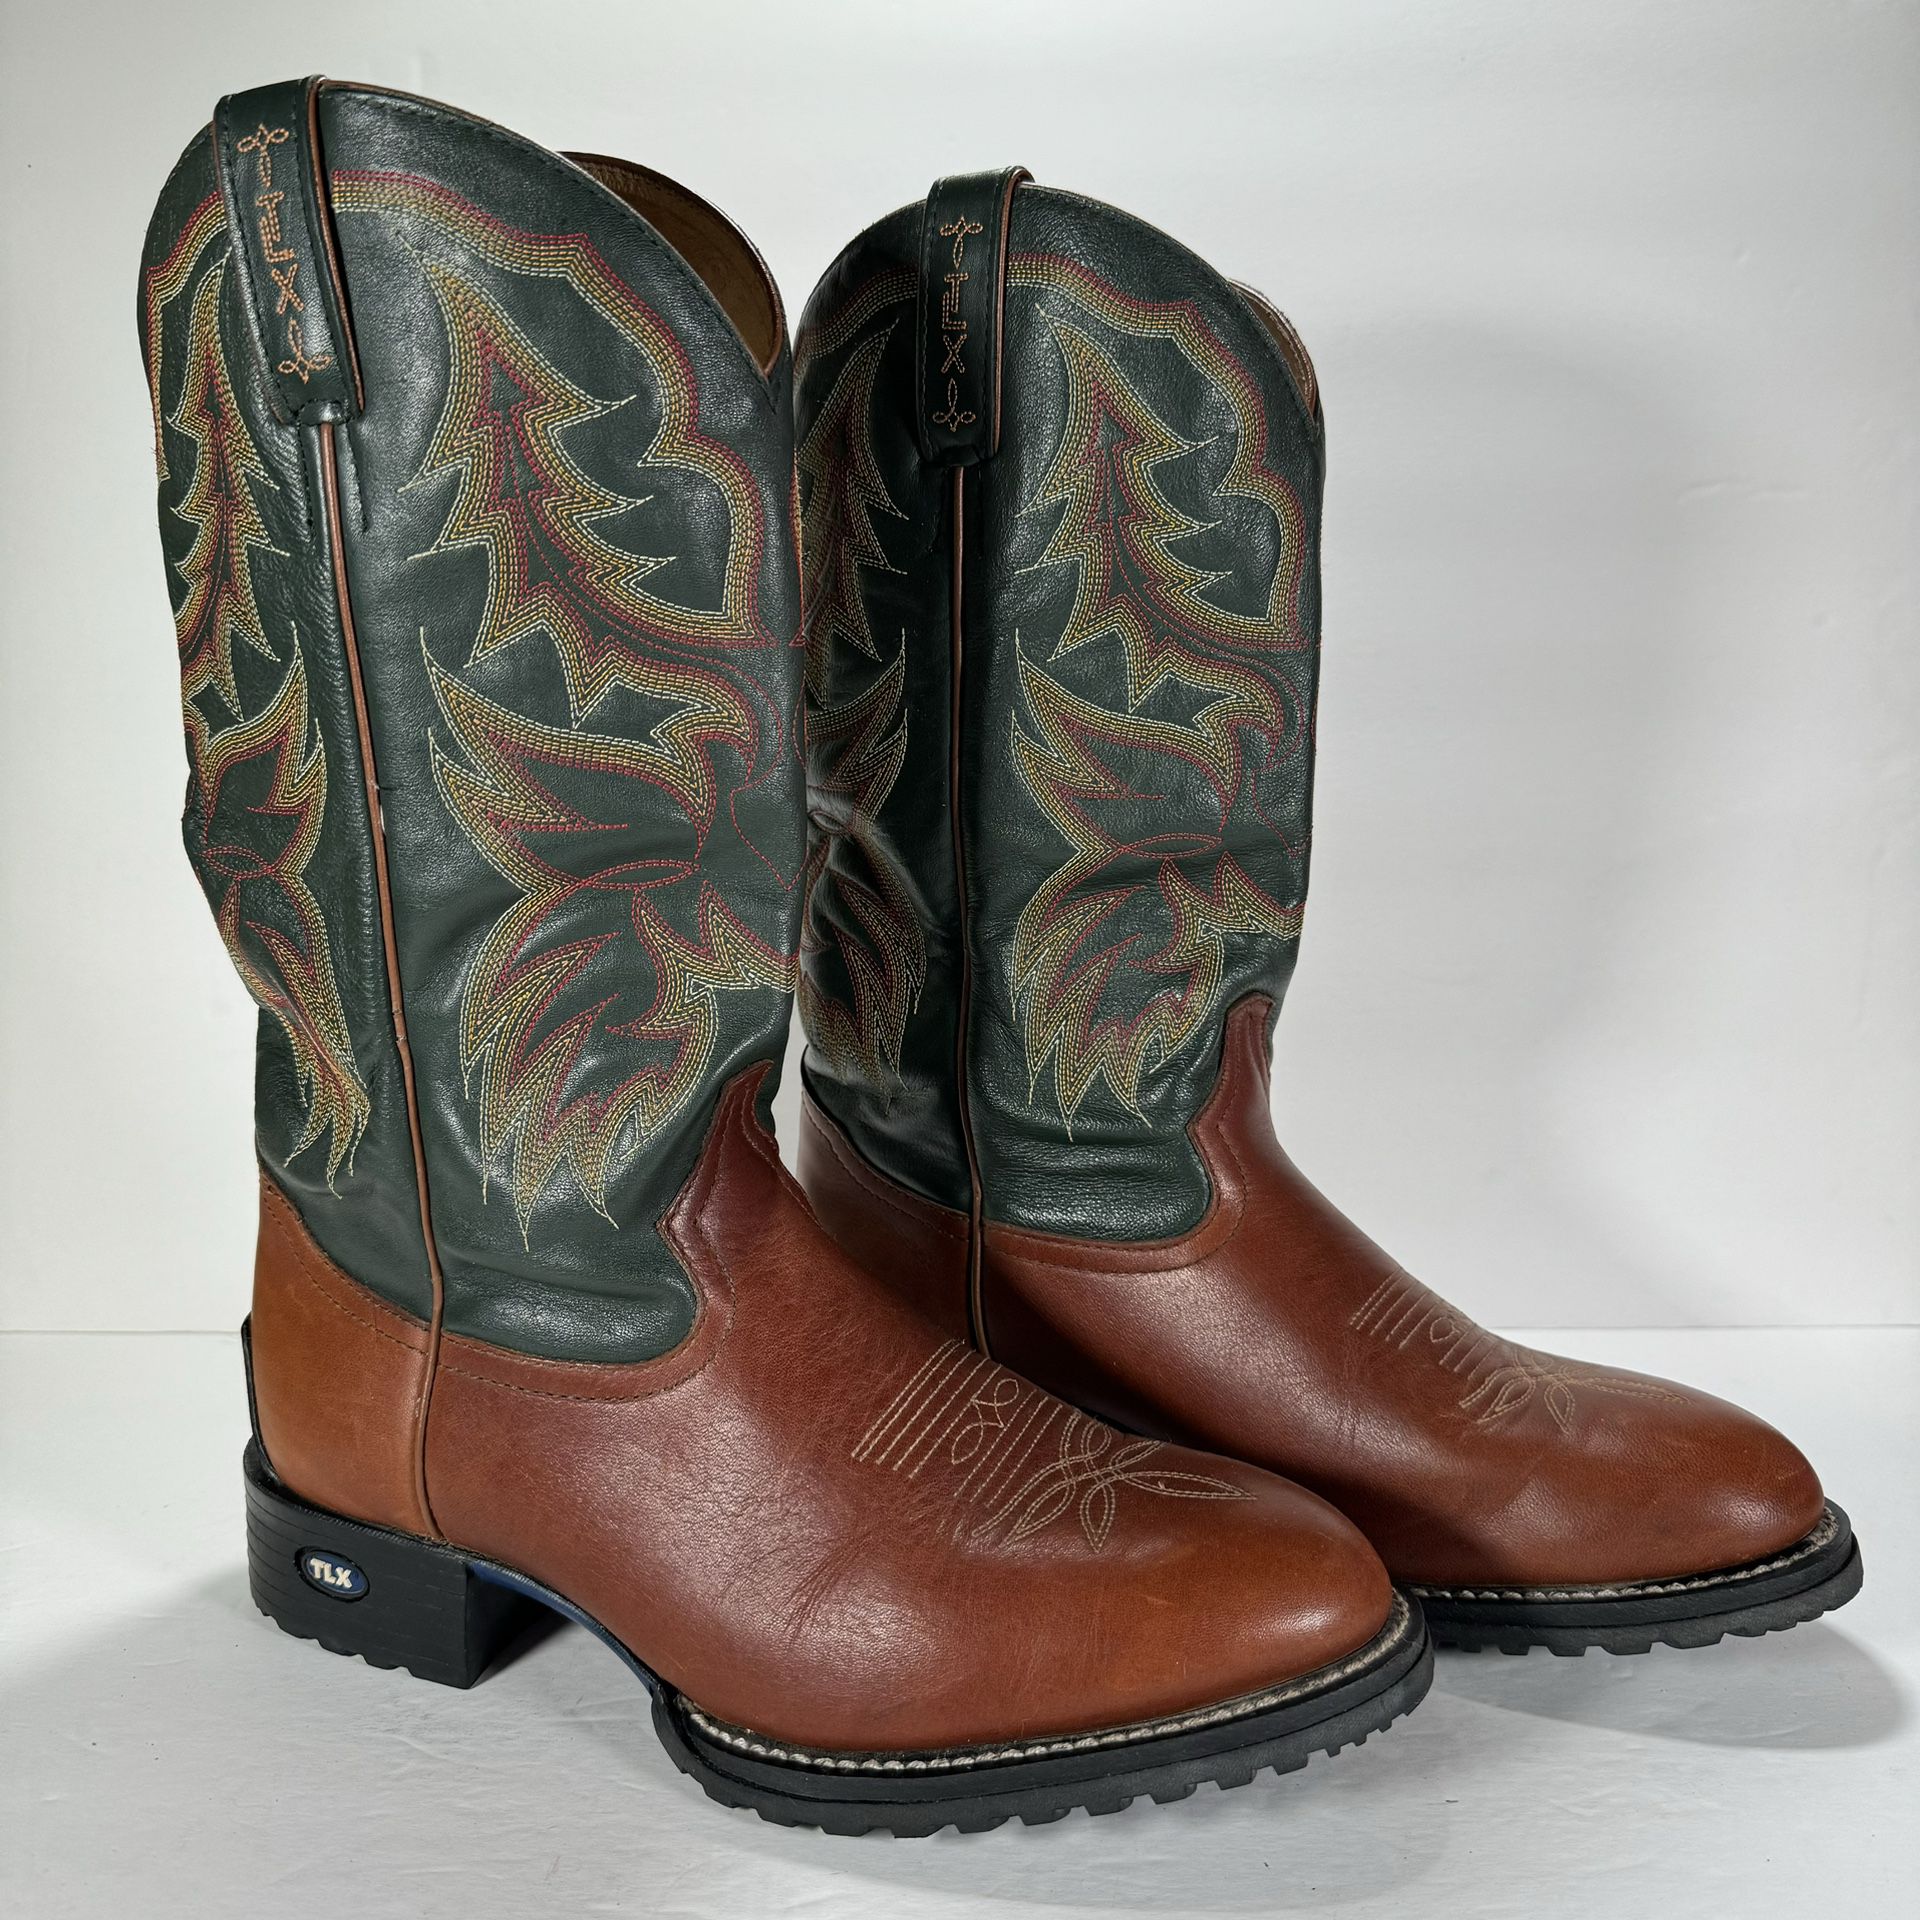 Tony Lama TLX Performance Collection Work Boots Green Brown Men’s Size 9.5D